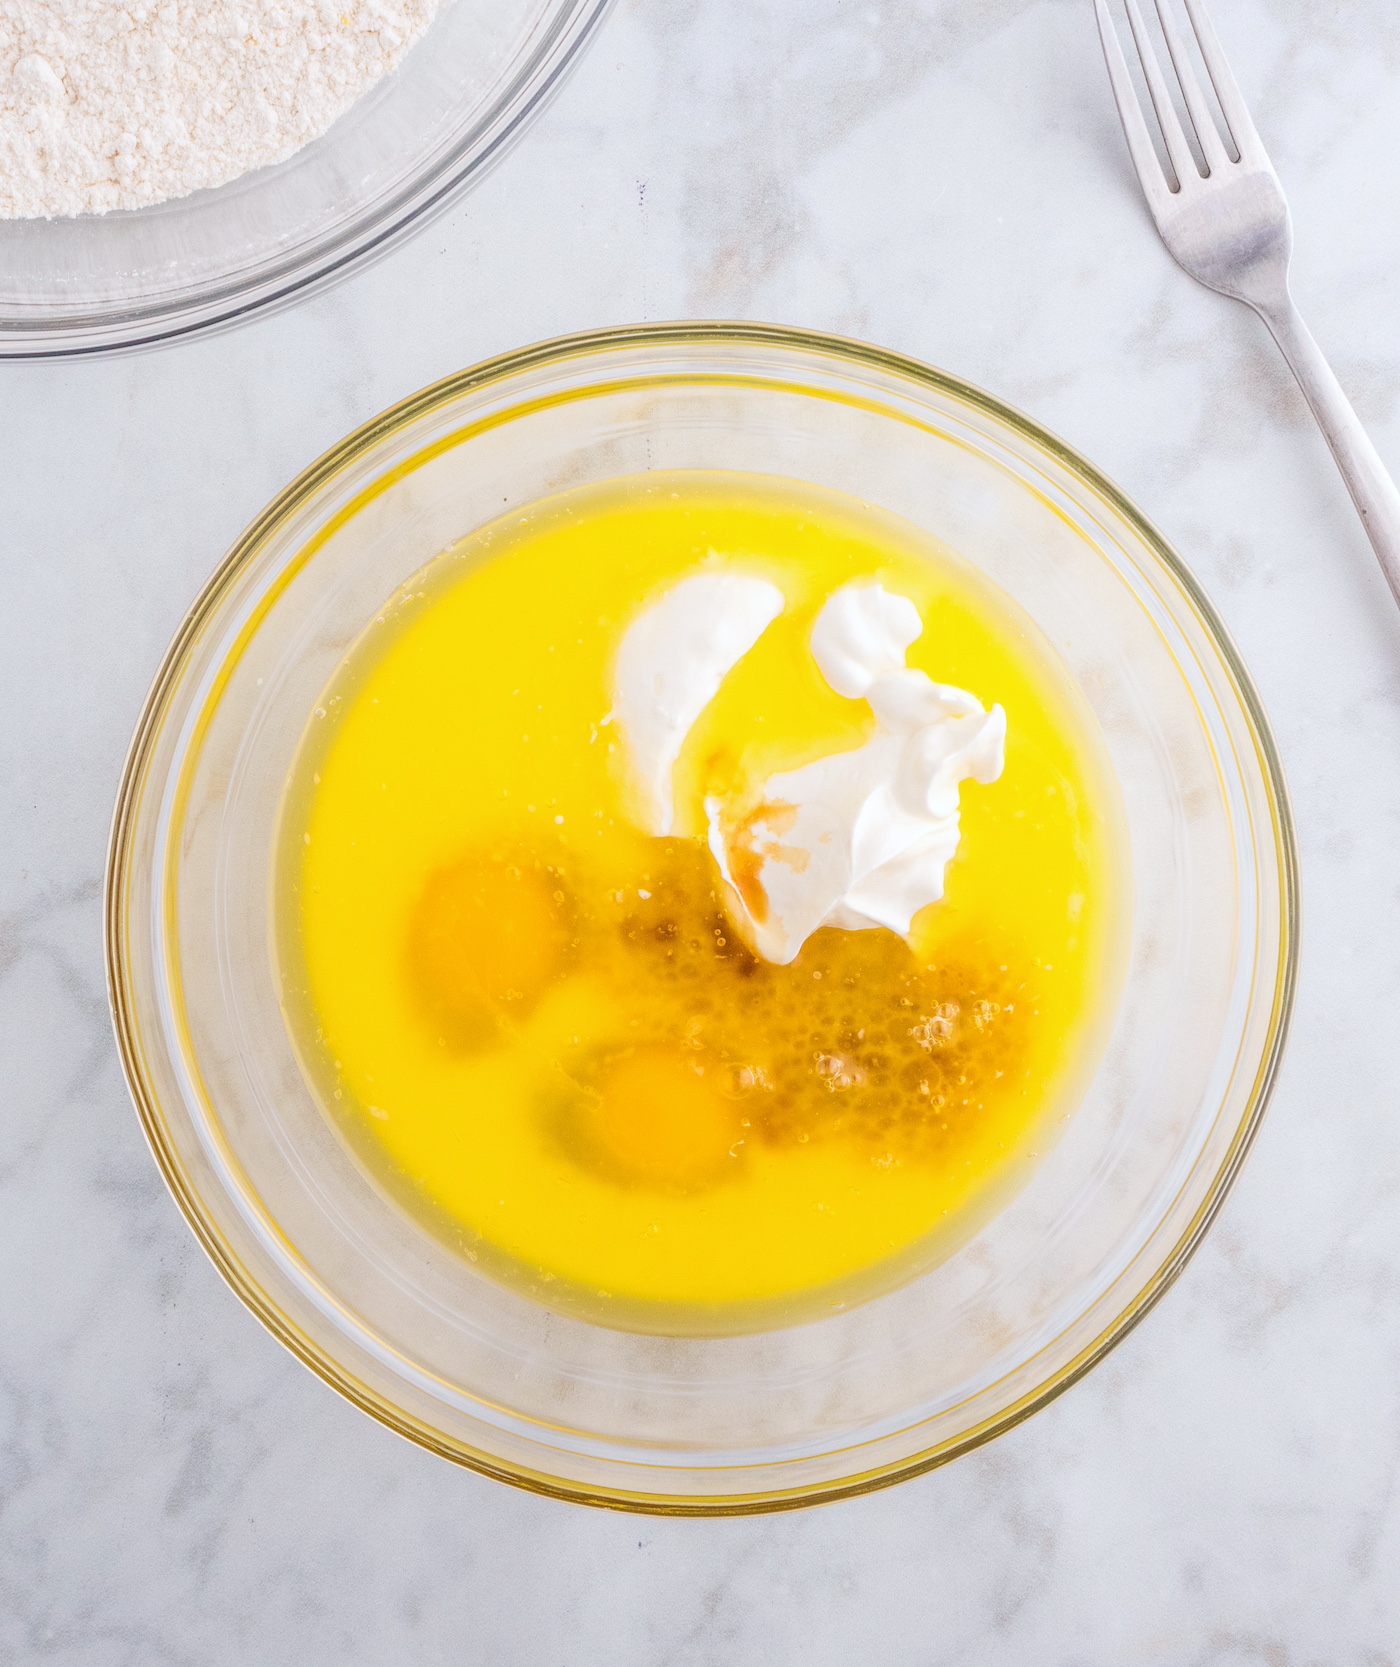 whisk together the melted butter, eggs, sour cream, milk, and vanilla extract